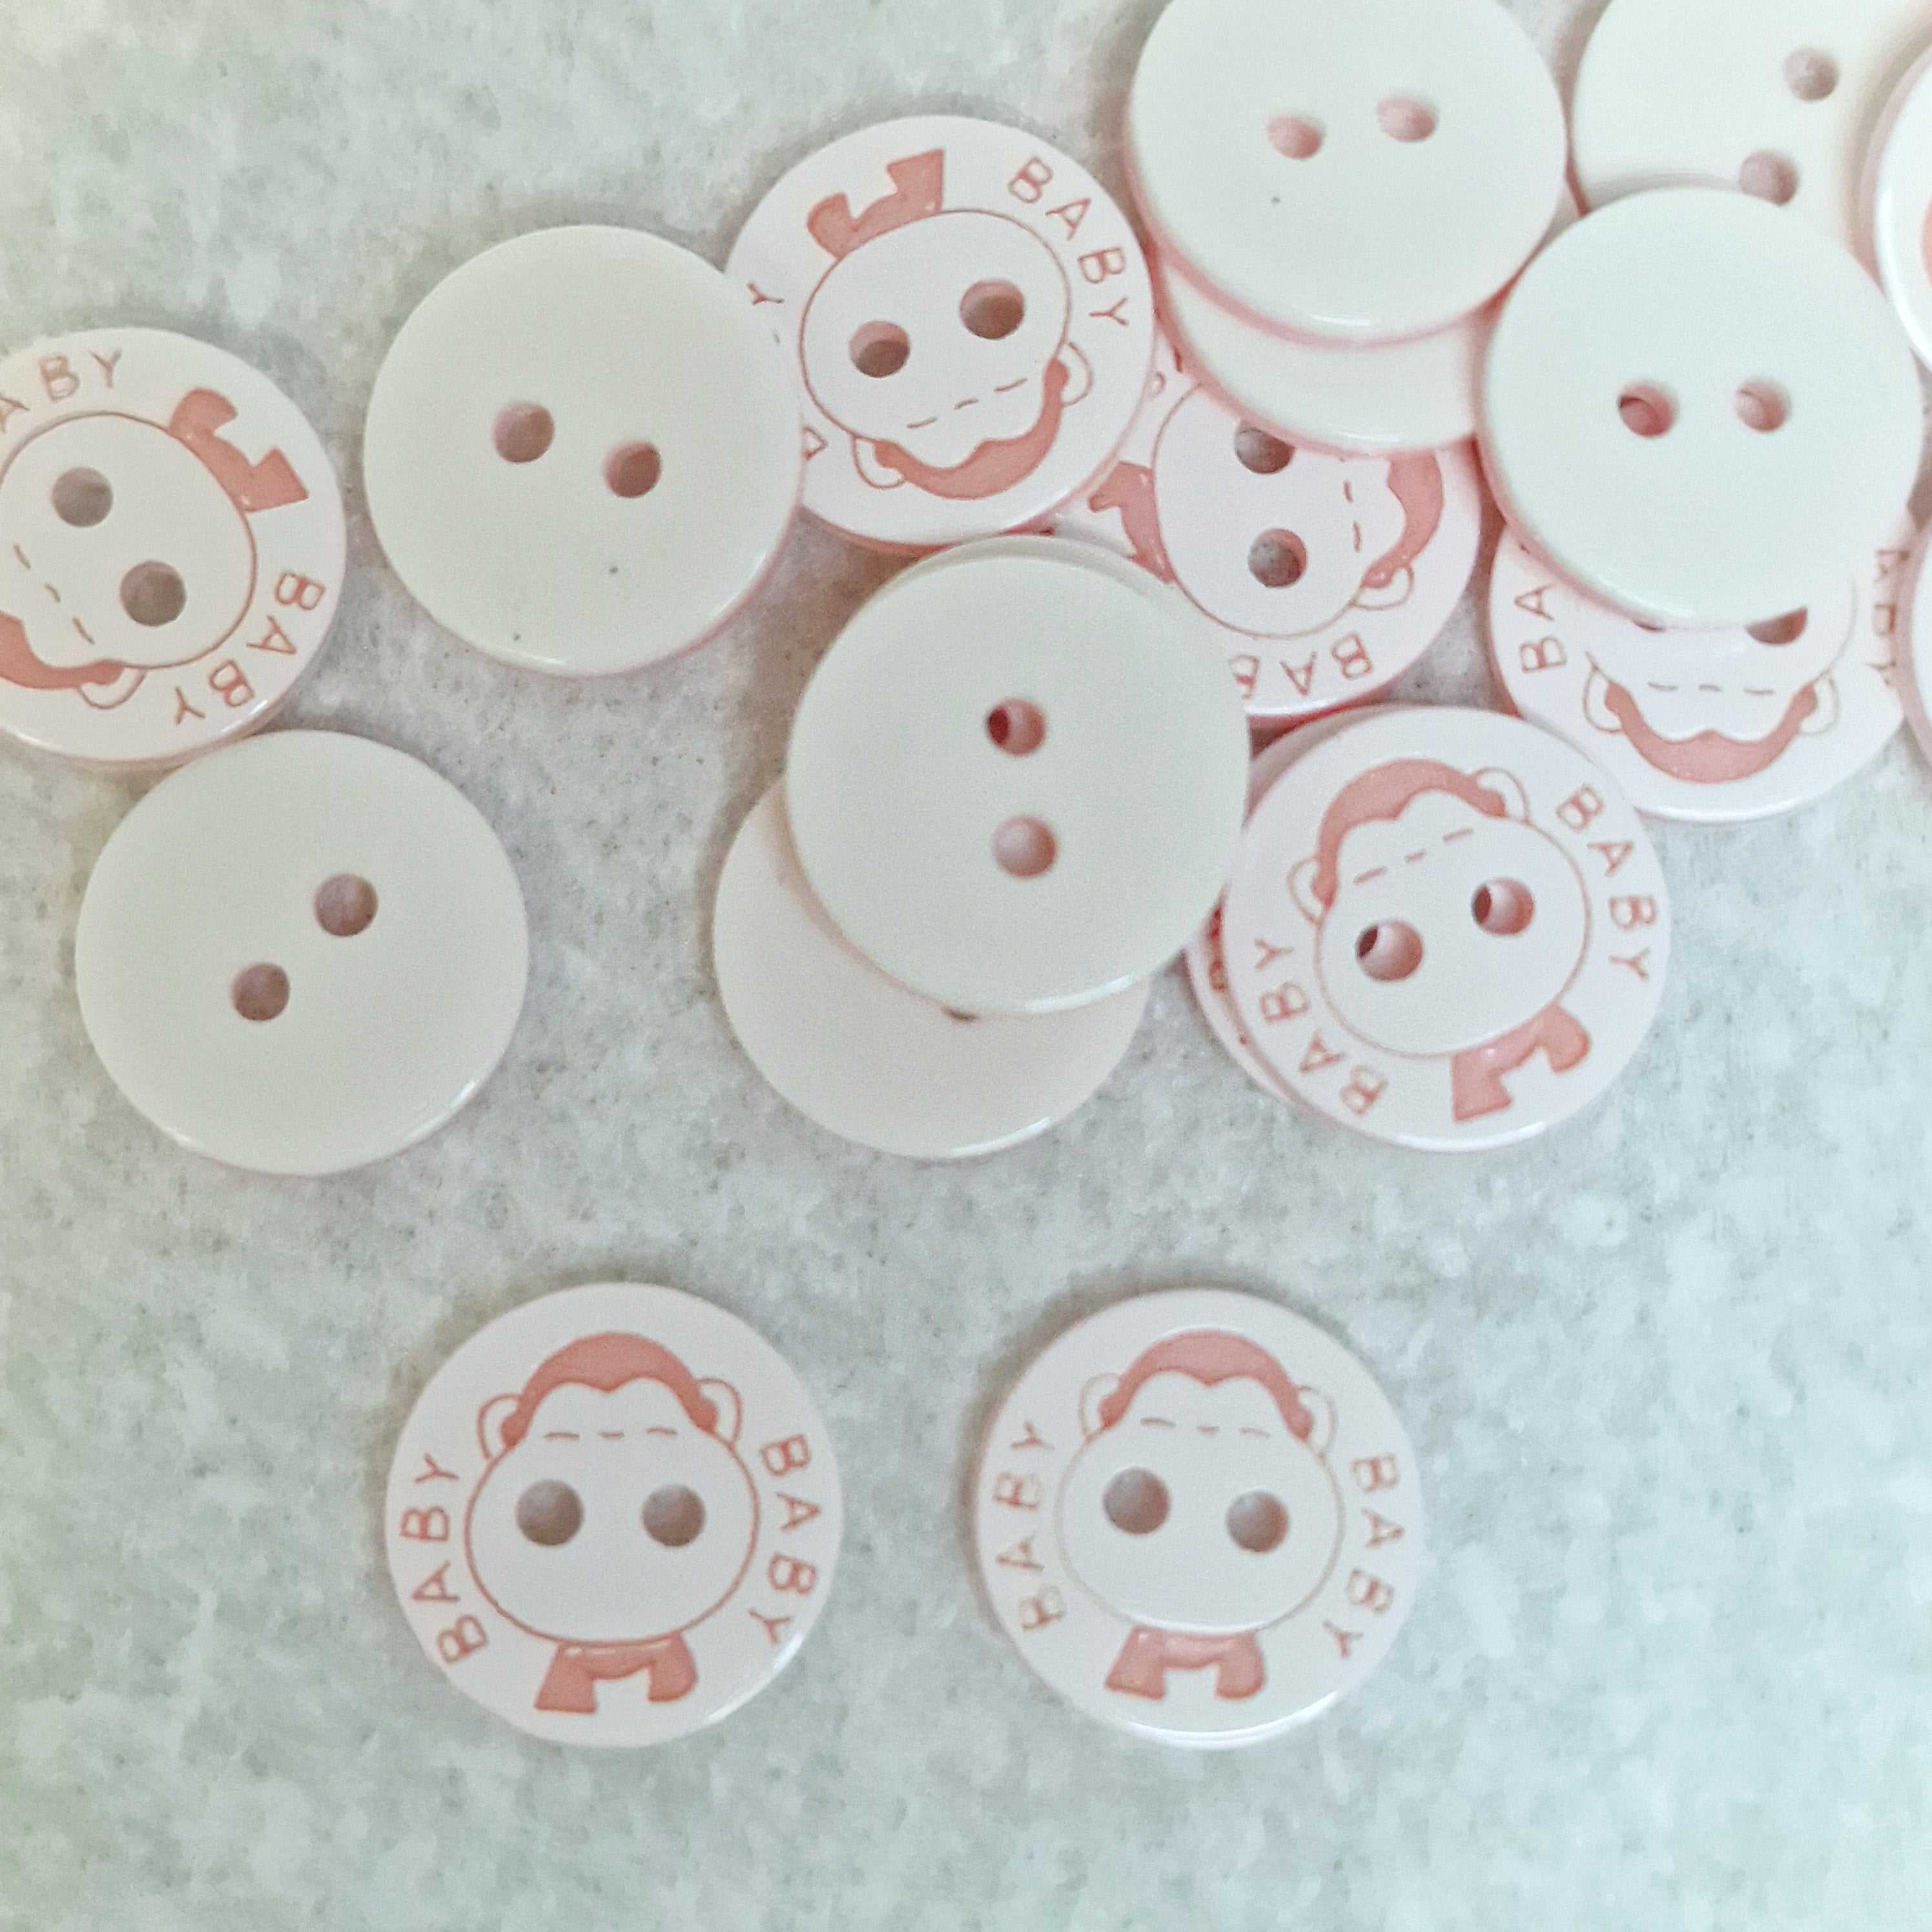 MajorCrafts 48pcs 12.5mm Light Pink & White 'Baby' Printed 2 Holes Small Round Resin Sewing Buttons